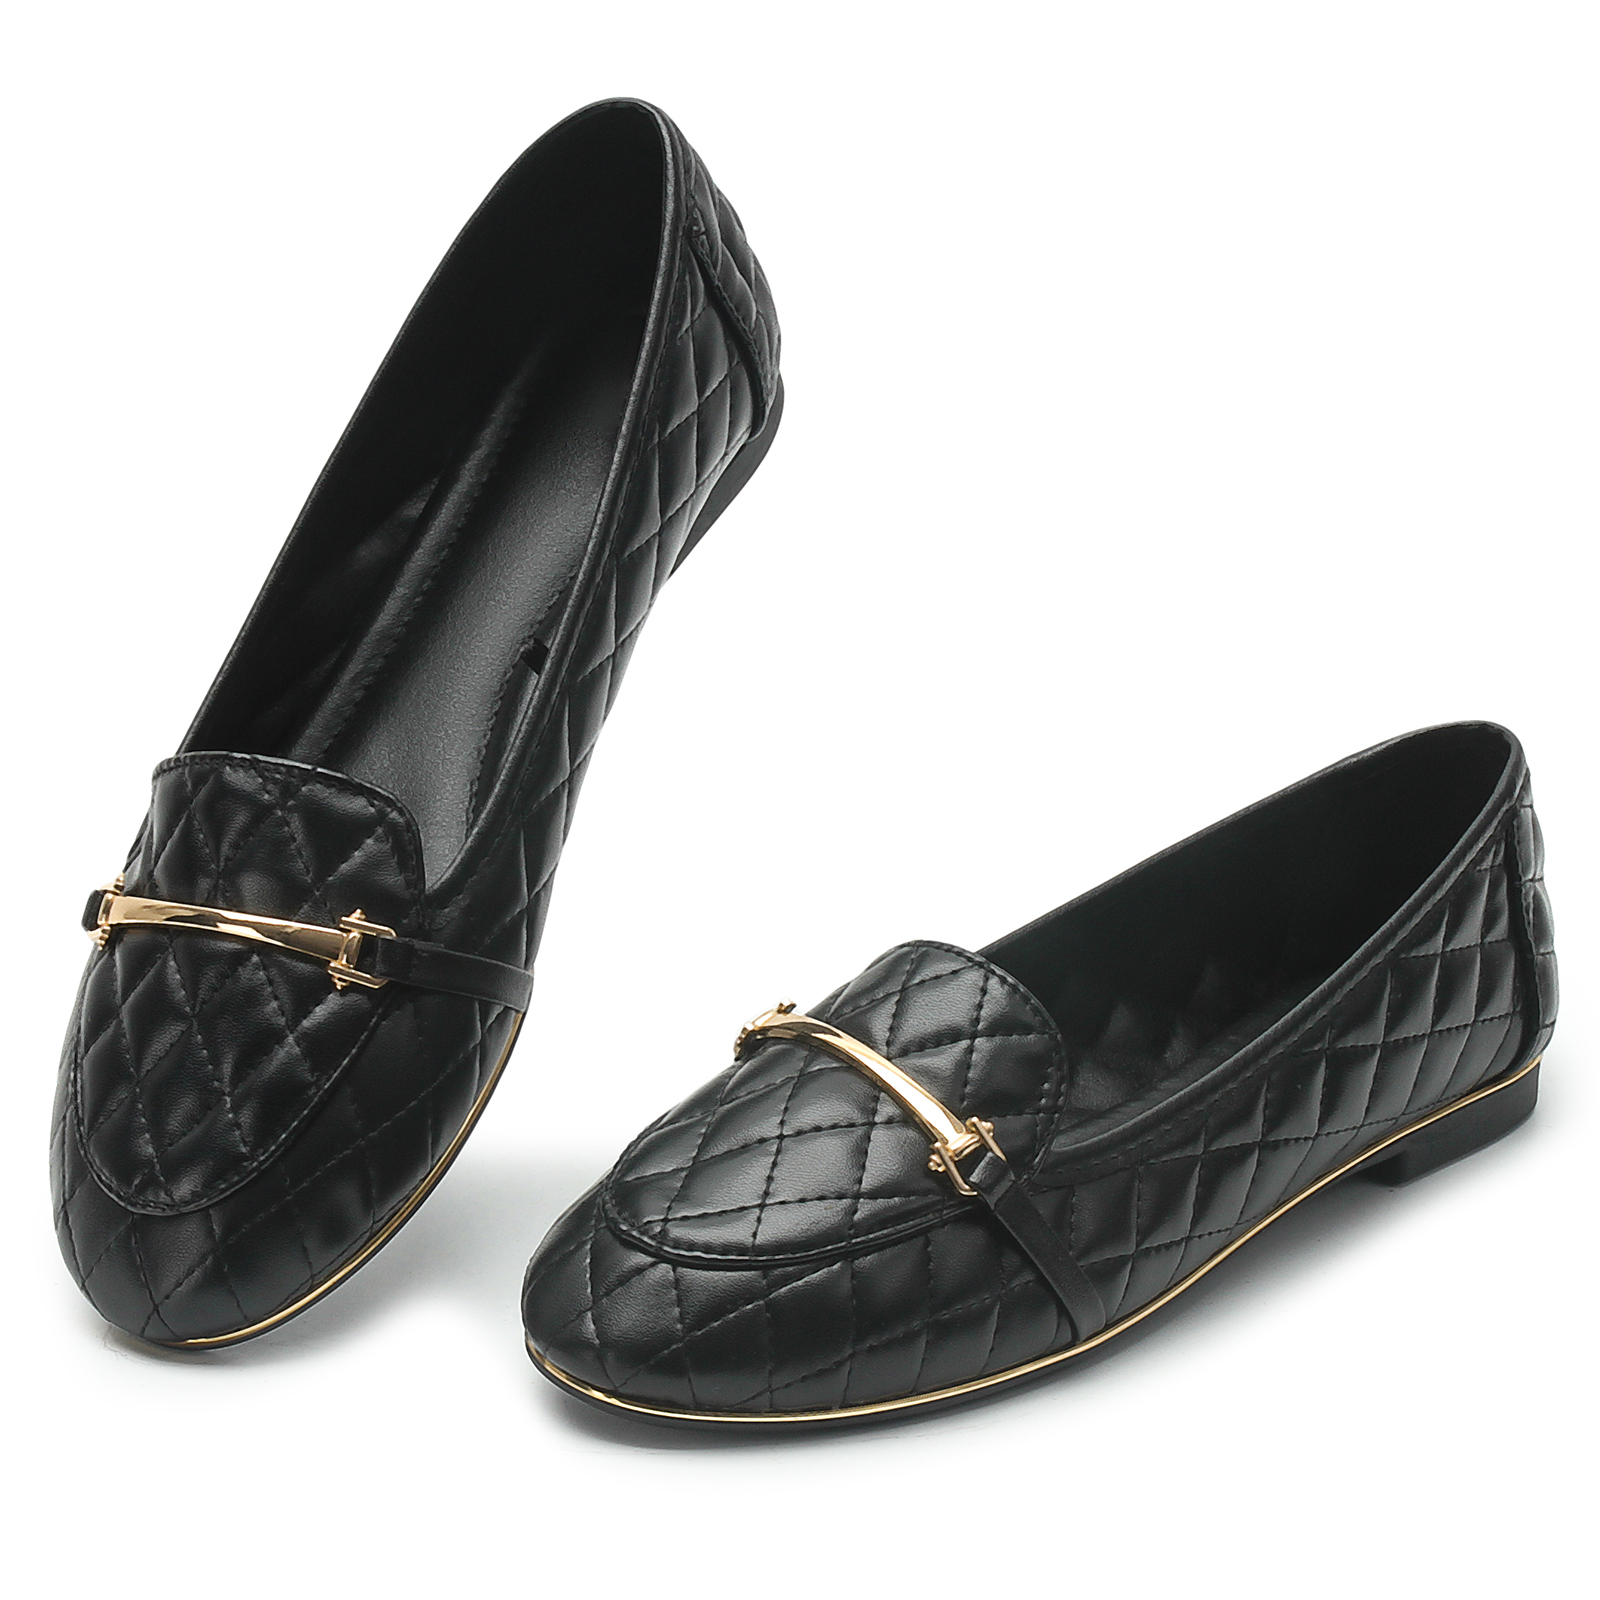 MUSSHOE Buckle Loafers Flats